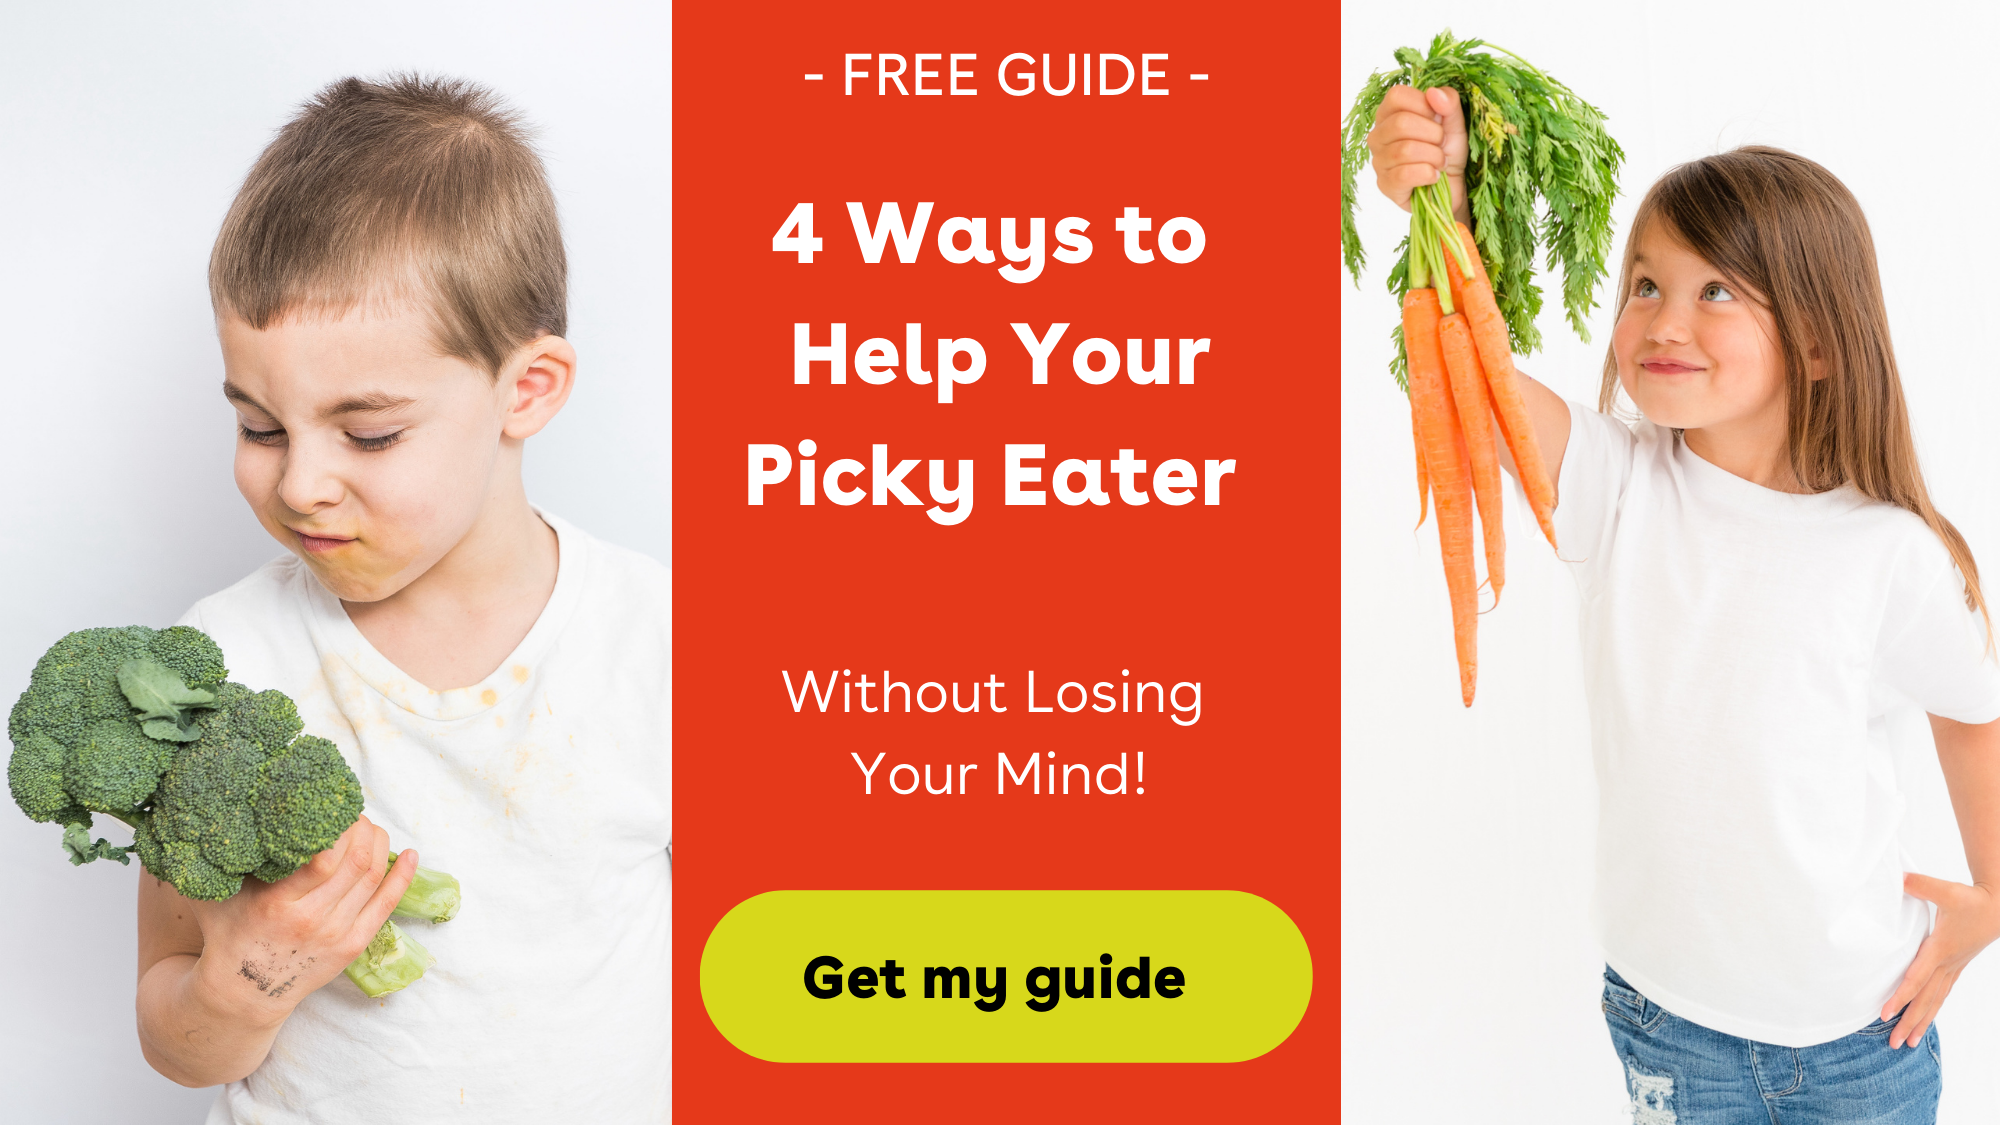 Free Picky Eater Guide AD